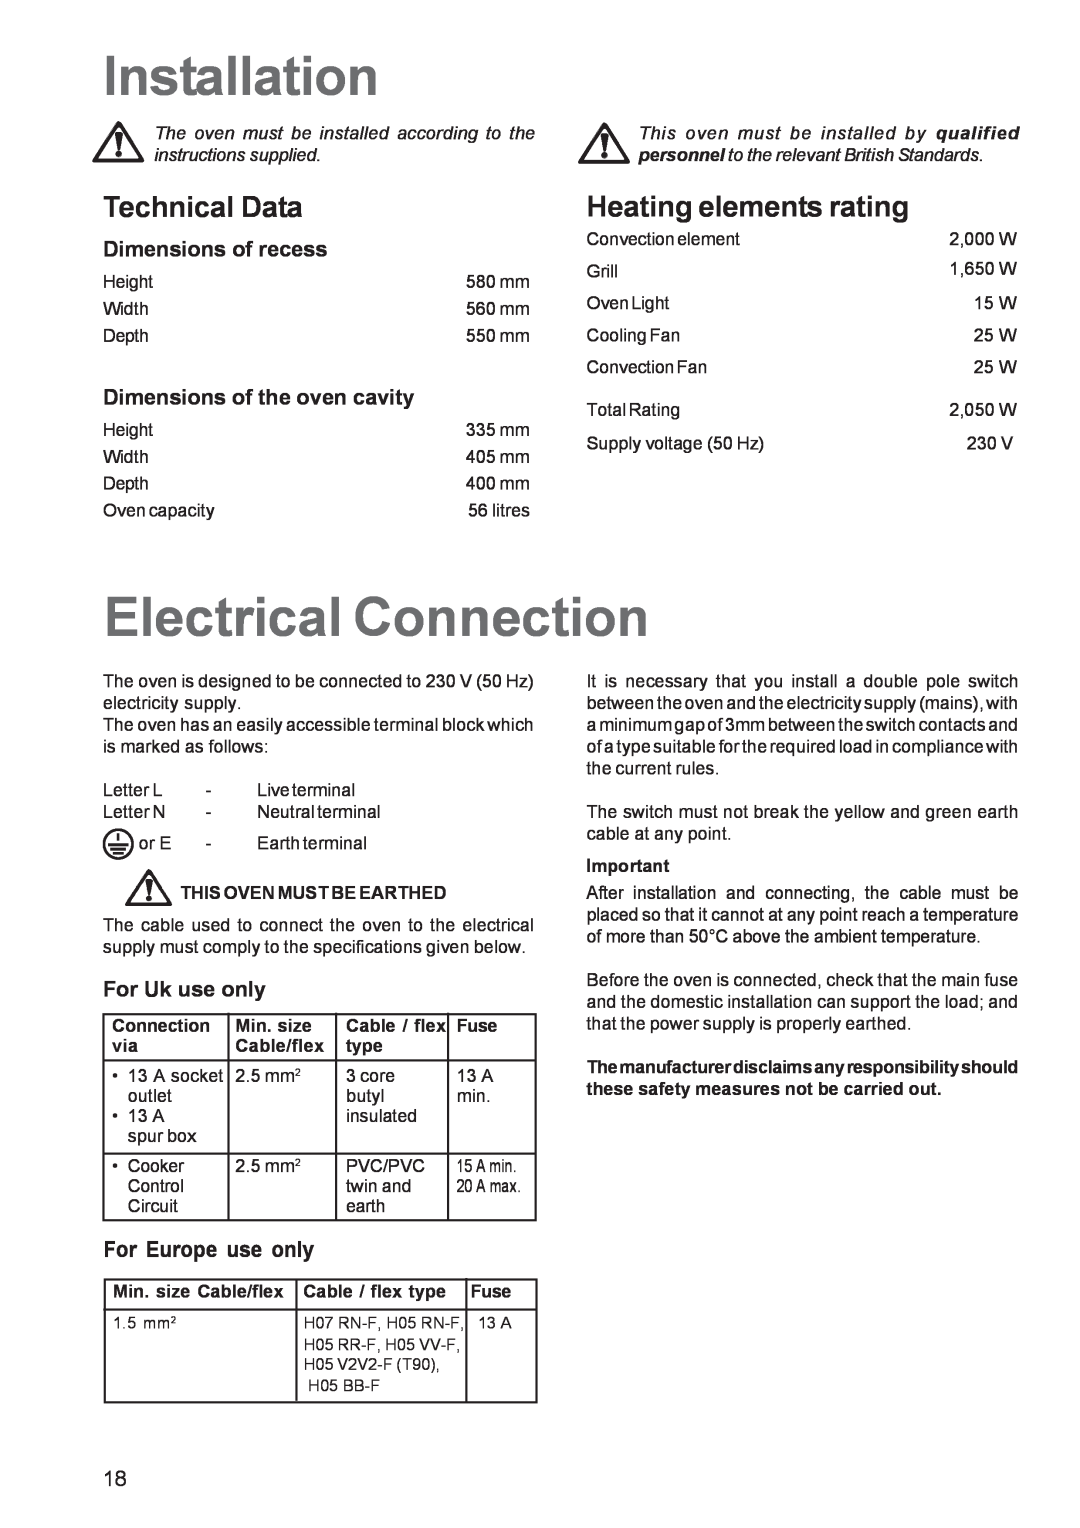 Zanussi ZBF 361 Installation, Electrical Connection, Technical Data, Heating elements rating, Dimensions of recess, Fuse 